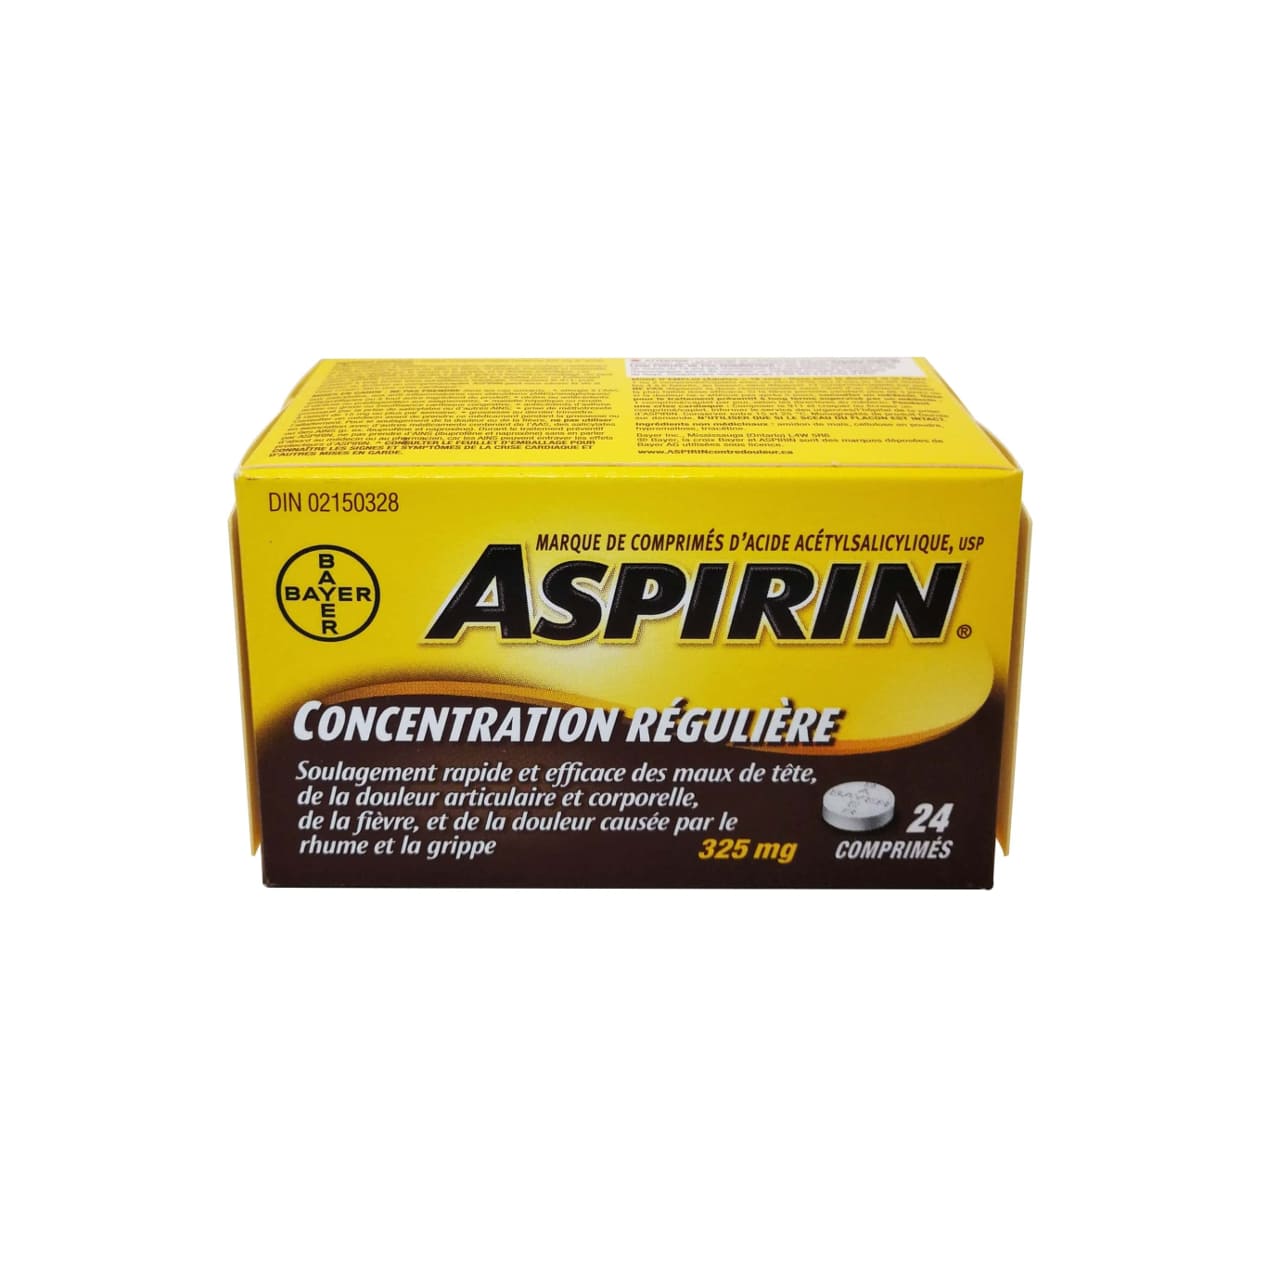 Product package for Aspirin Regular Strength Acetylsalicylic Acid 325mg (Tablets) 24 pack in French